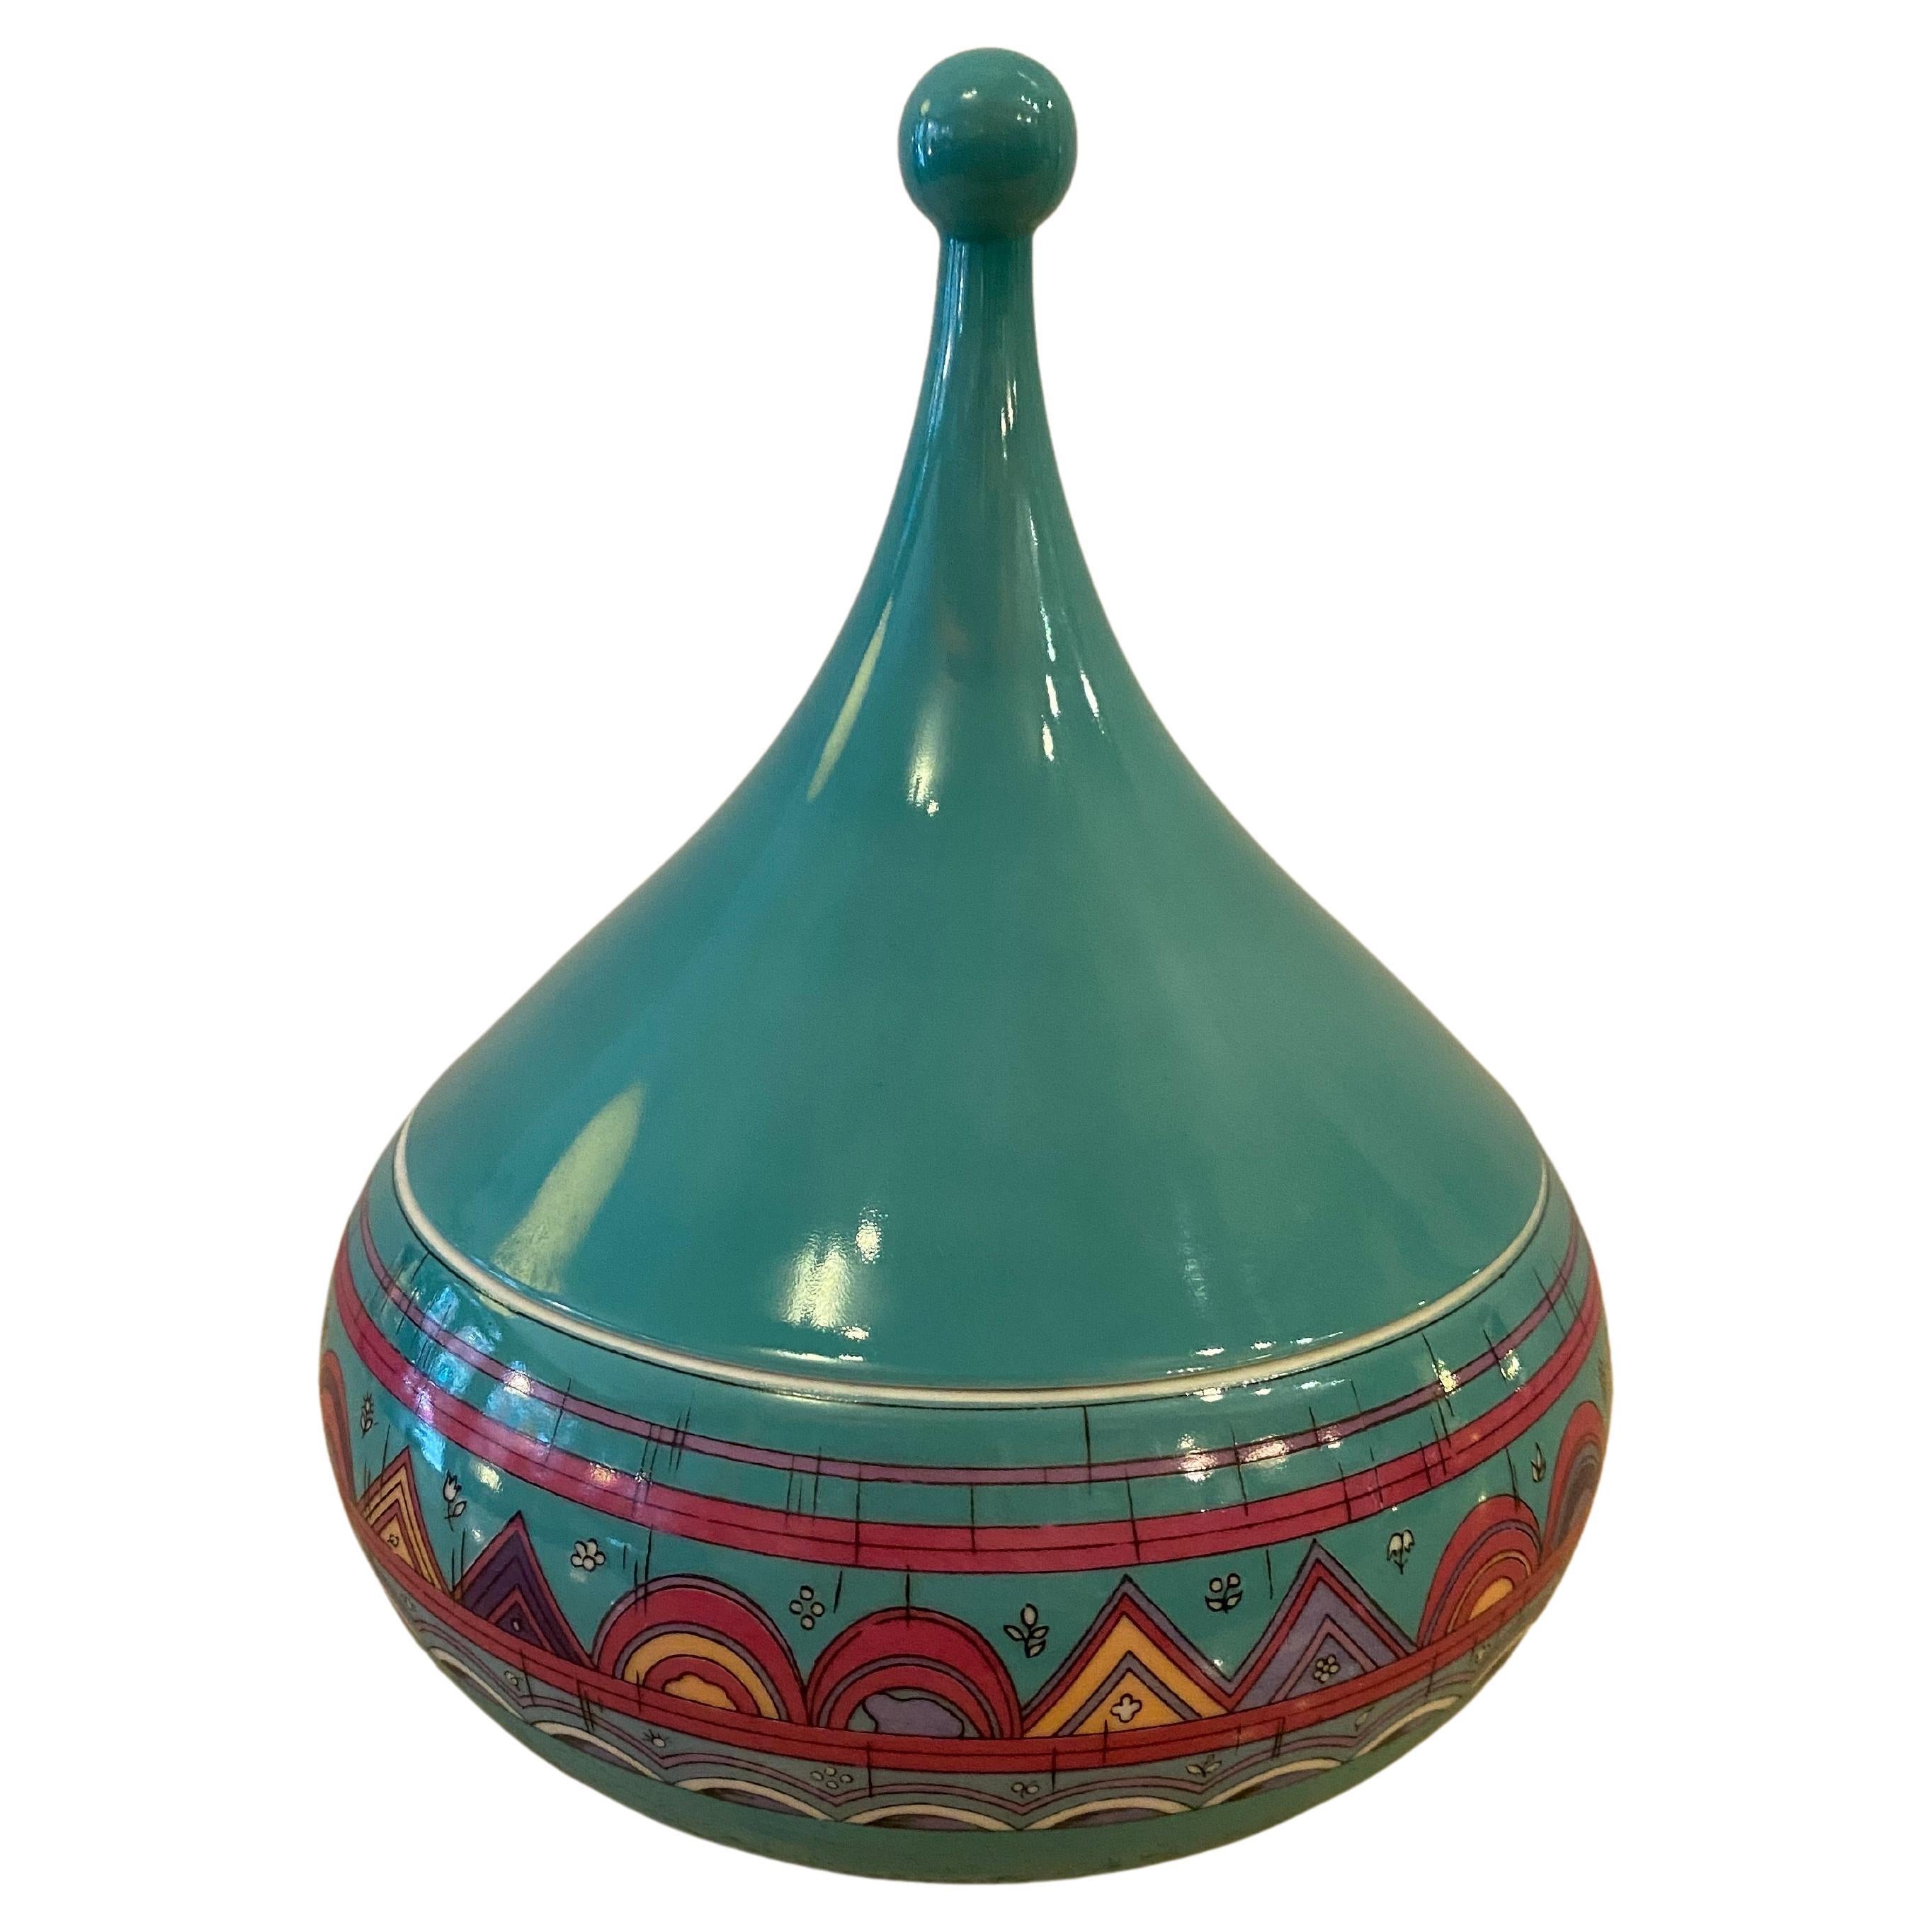 Emilio Pucci for Rosenthal Lidded Ceramic Bowl For Sale